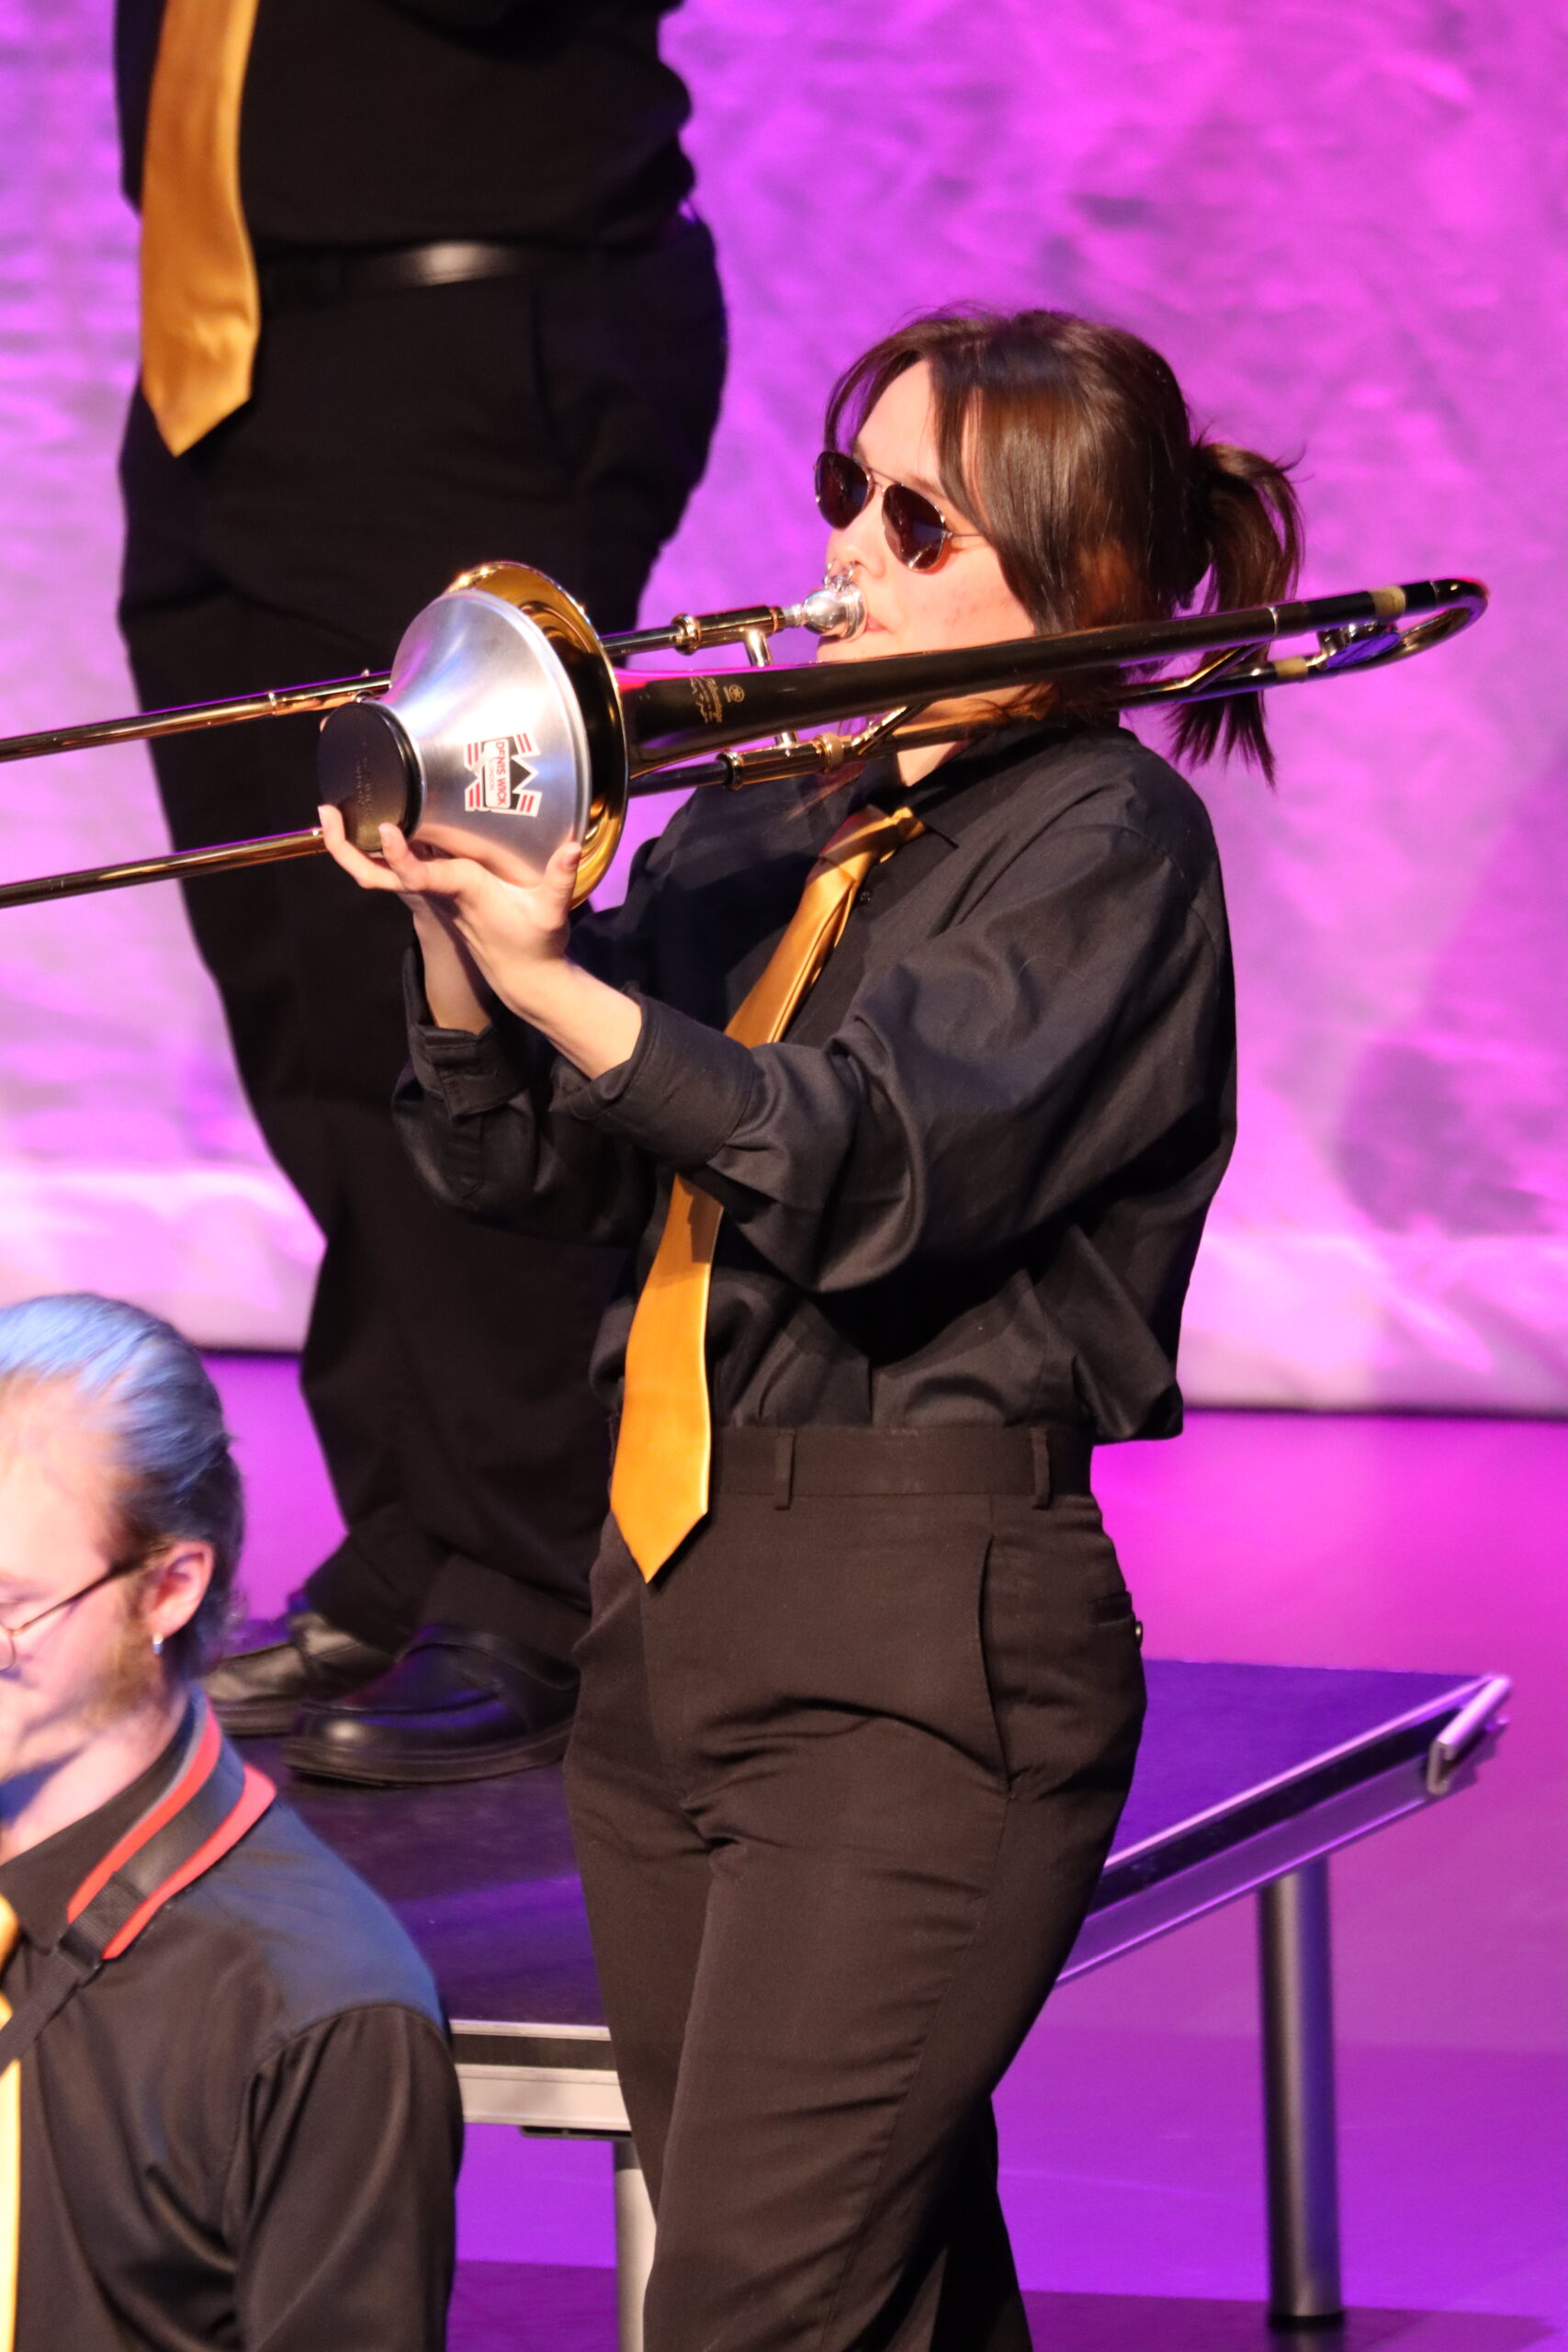 Brianna McFall embodies the rhythm of the night while beautifully playing the Trombone.